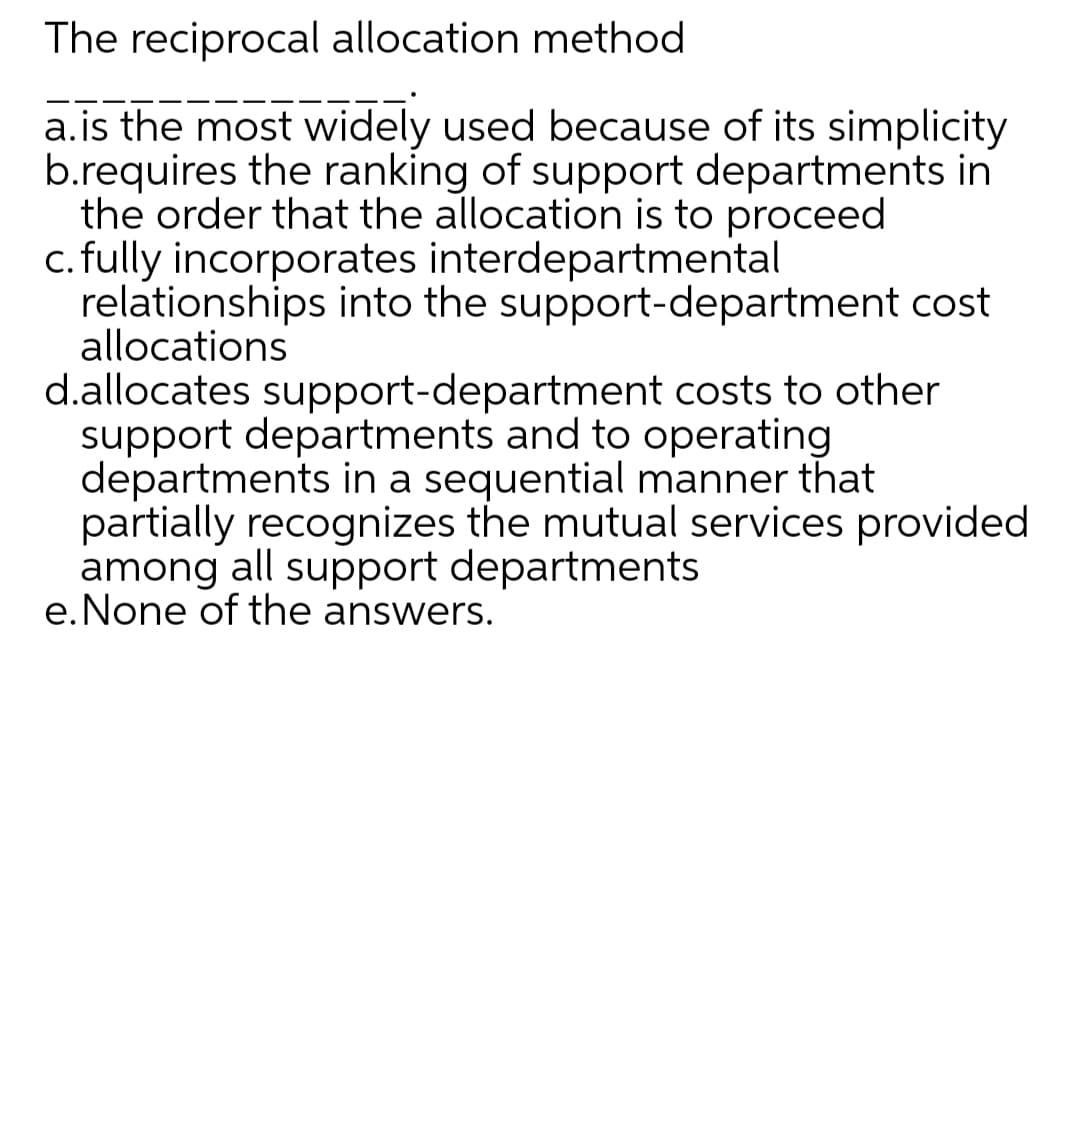 The reciprocal allocation method
a.is the most widely used because of its simplicity
b.requires the ranking of support departments in
the order that the allocation is to proceed
c. fully incorporates interdepartmental
relationships into the support-department cost
allocations
d.allocates support-department costs to other
support departments and to operating
departments in a sequential manner that
partially recognizes the mutual services provided
among all support departments
e.None of the answers.
